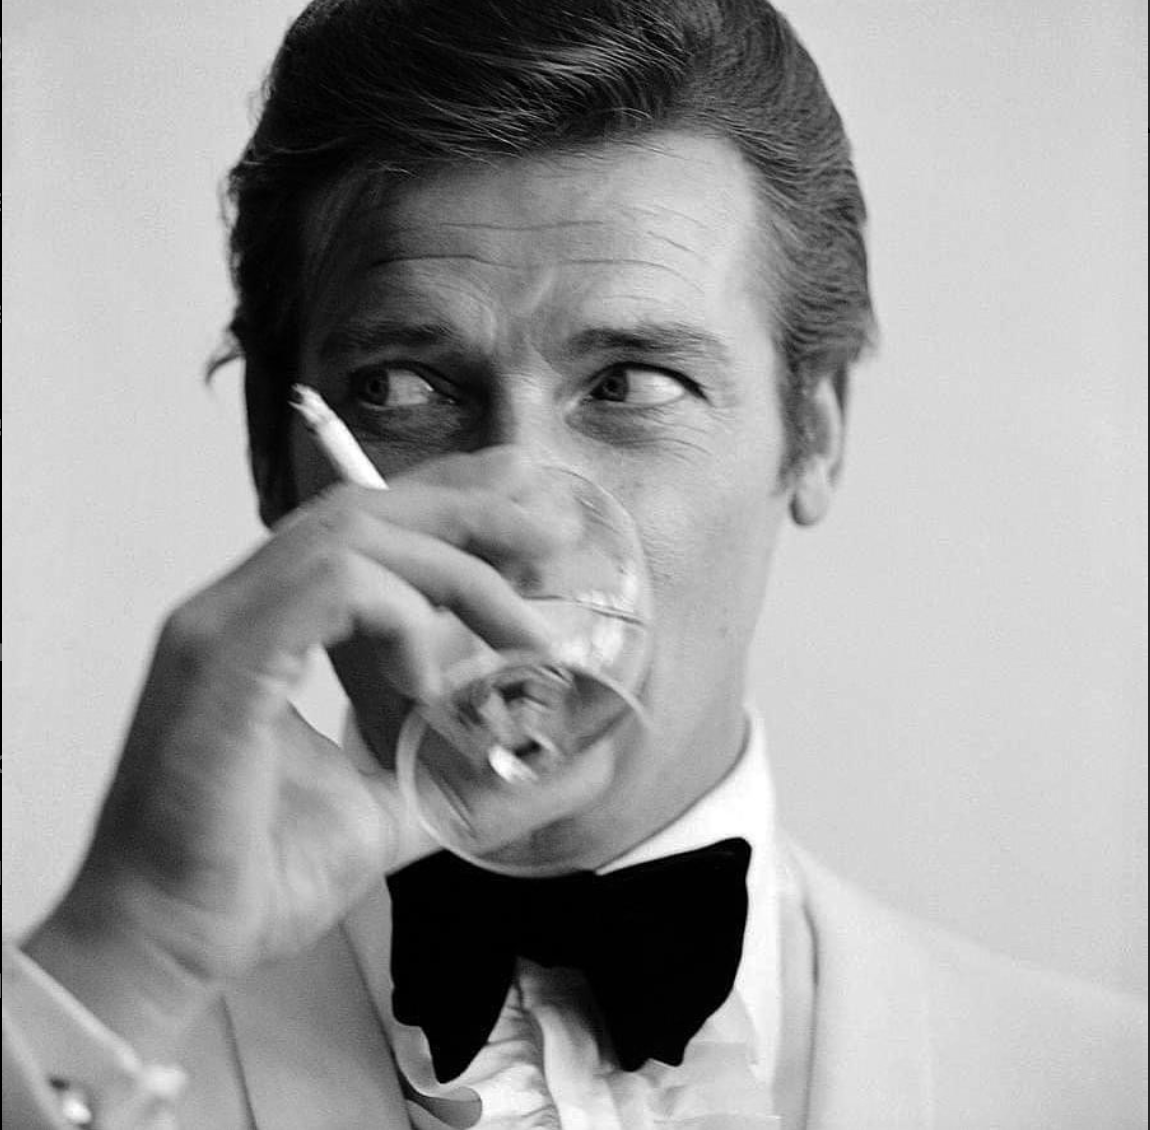 #cheers #everybody #gentlemanstyle #rogermoore as #lordbrettsinclair #thepersuaders #itv #tvshow #action #comedyseries #70s #70sstyle #moviestar #peoplephotography #lifestylephotography #cinematography #beyondcoolmag #motion #travel #urban #life